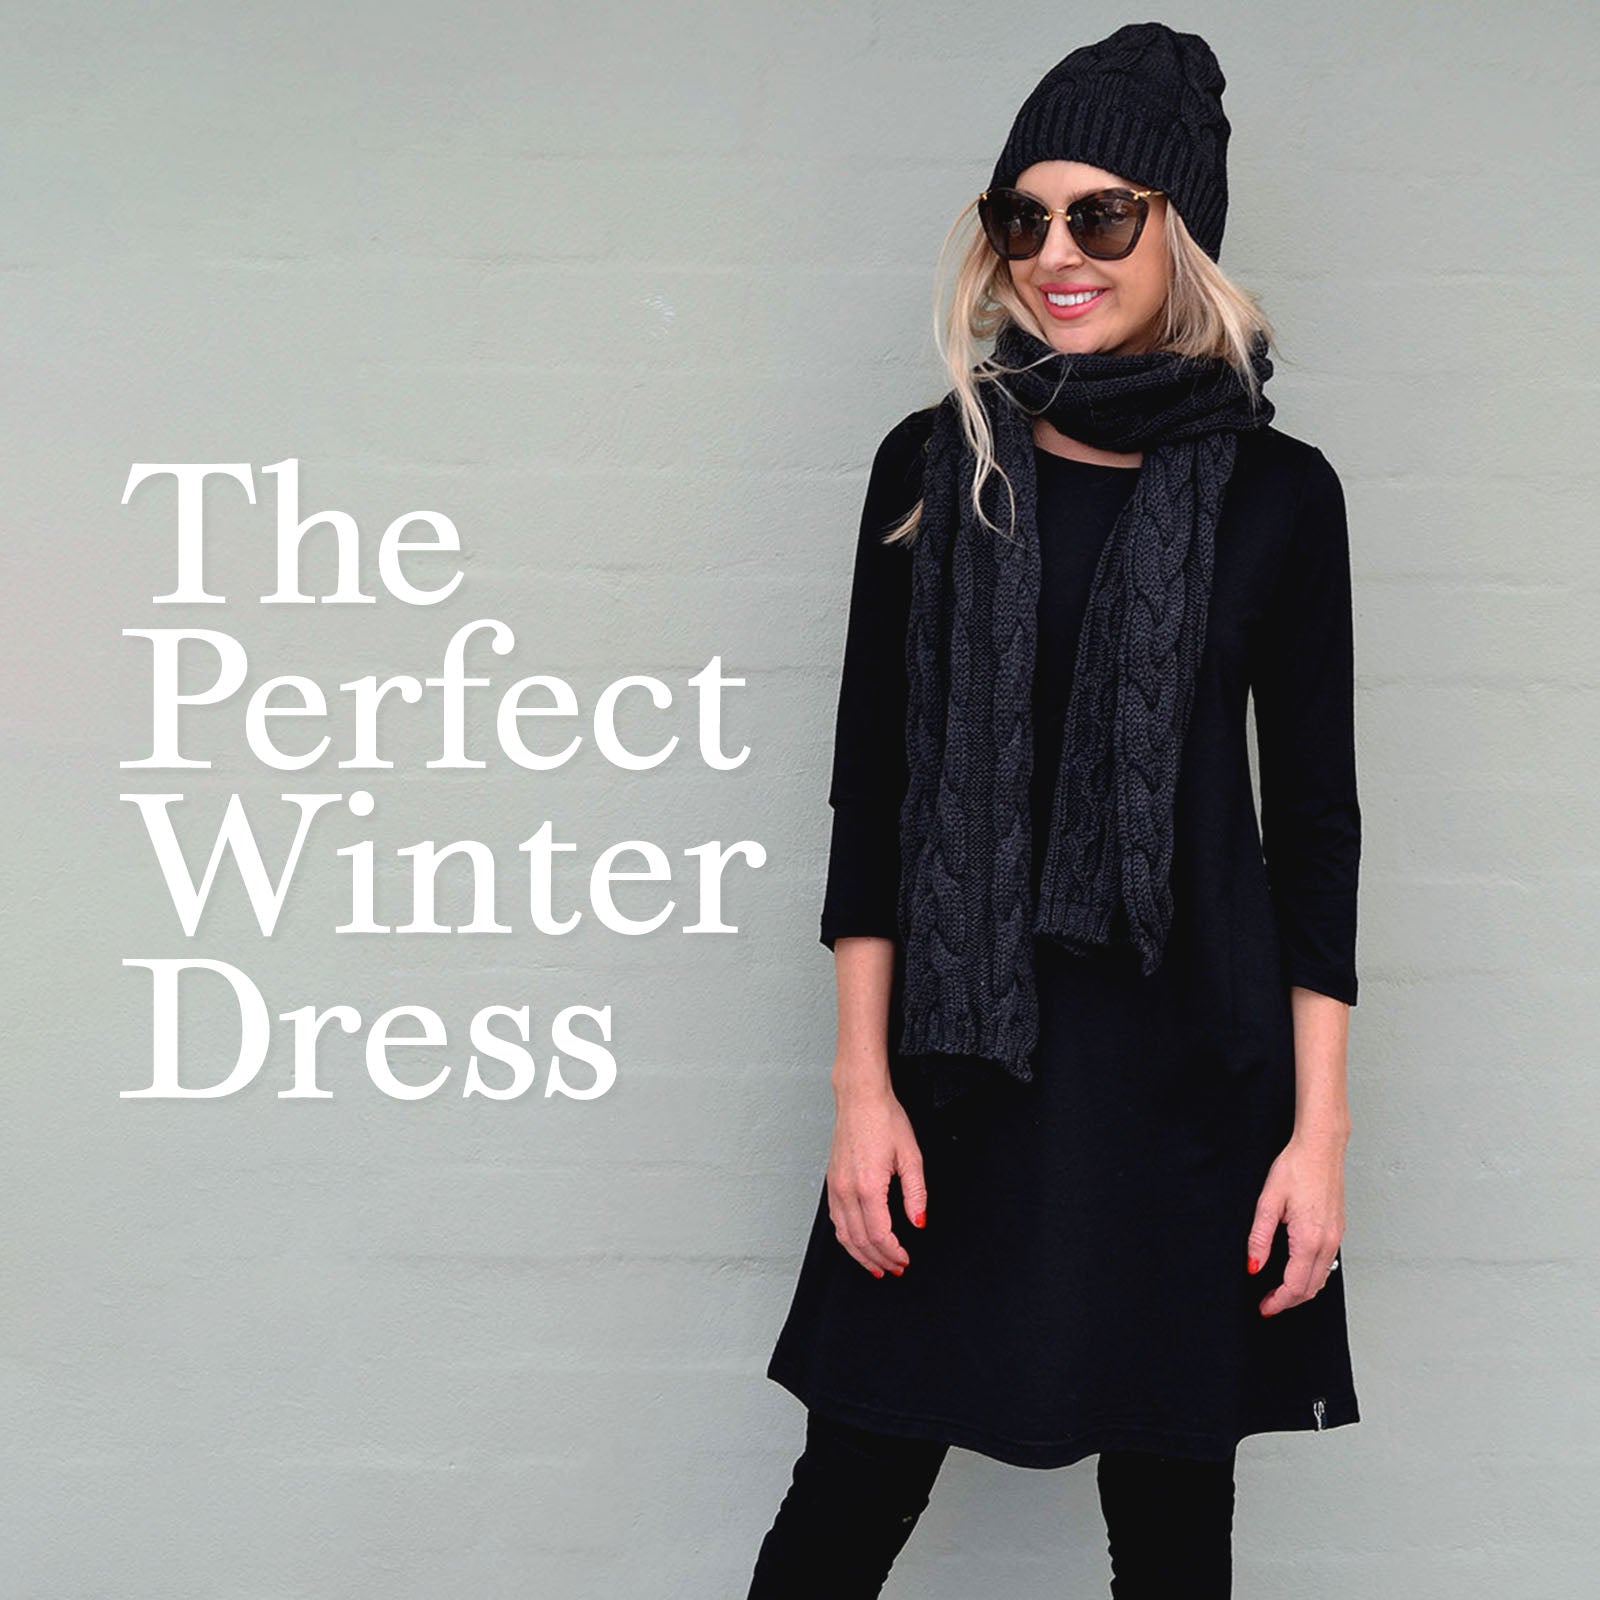 How to Make a Dress Warmer in the Winter  Swing dresses outfit, Dresses with  leggings, Style